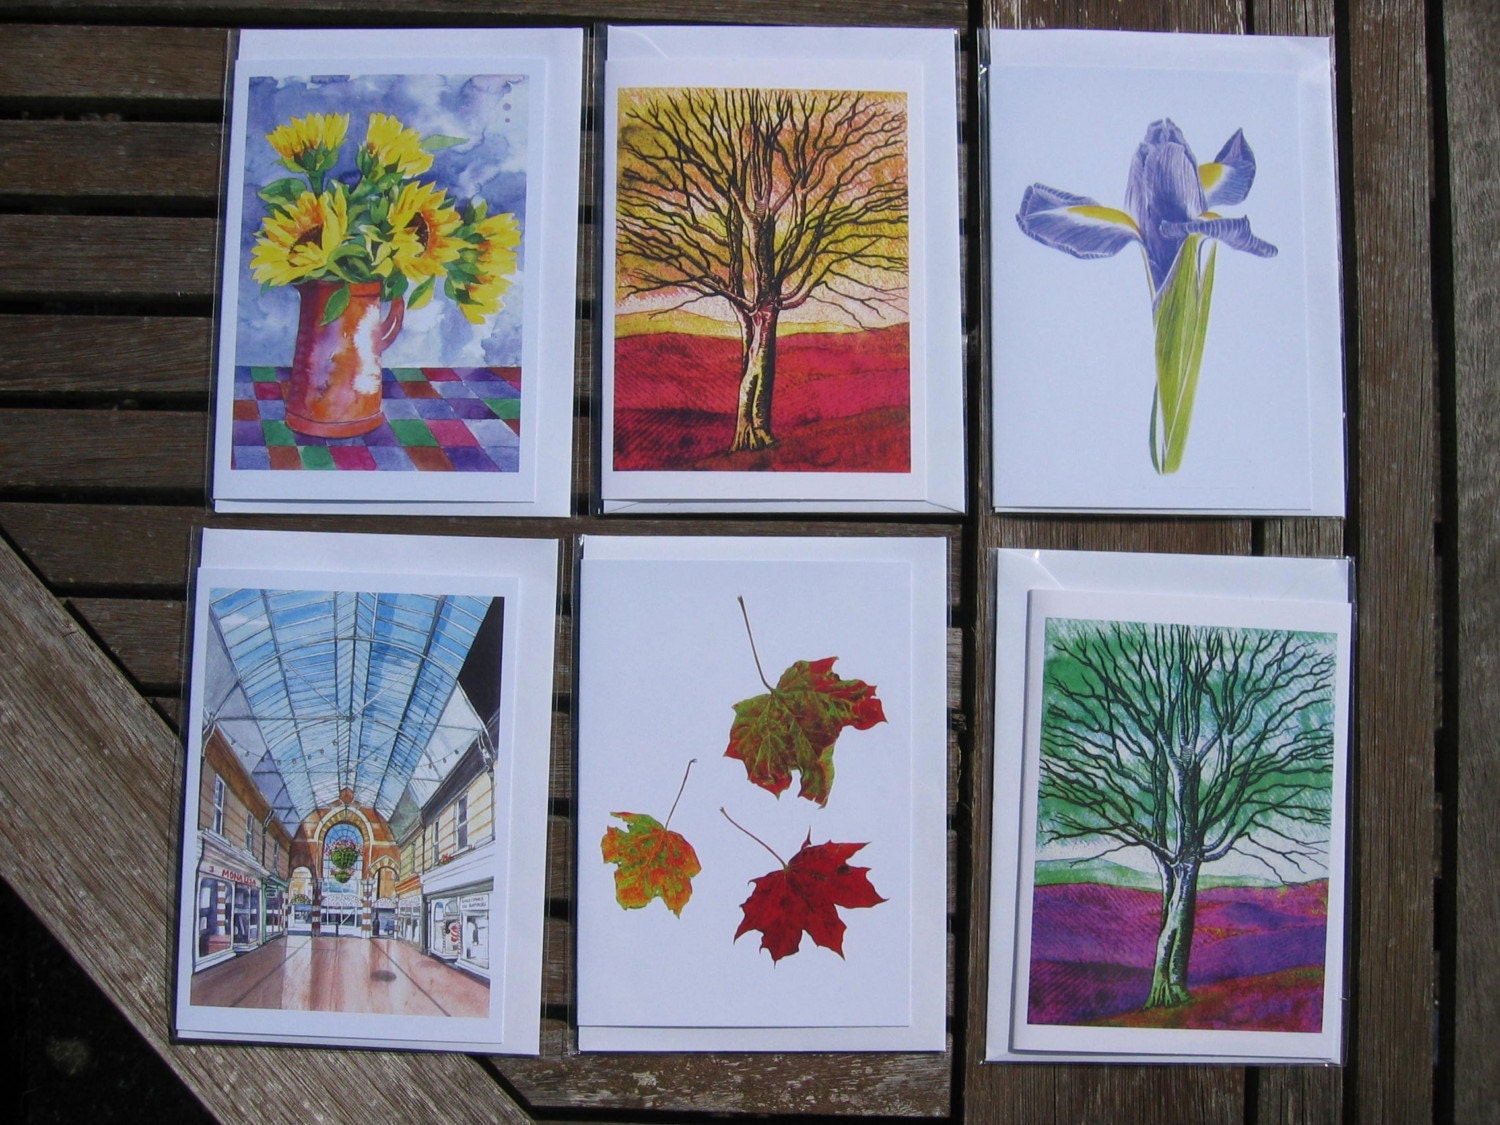 10 Greetings Cards from my Original Watercolours and/or Digital Artwork